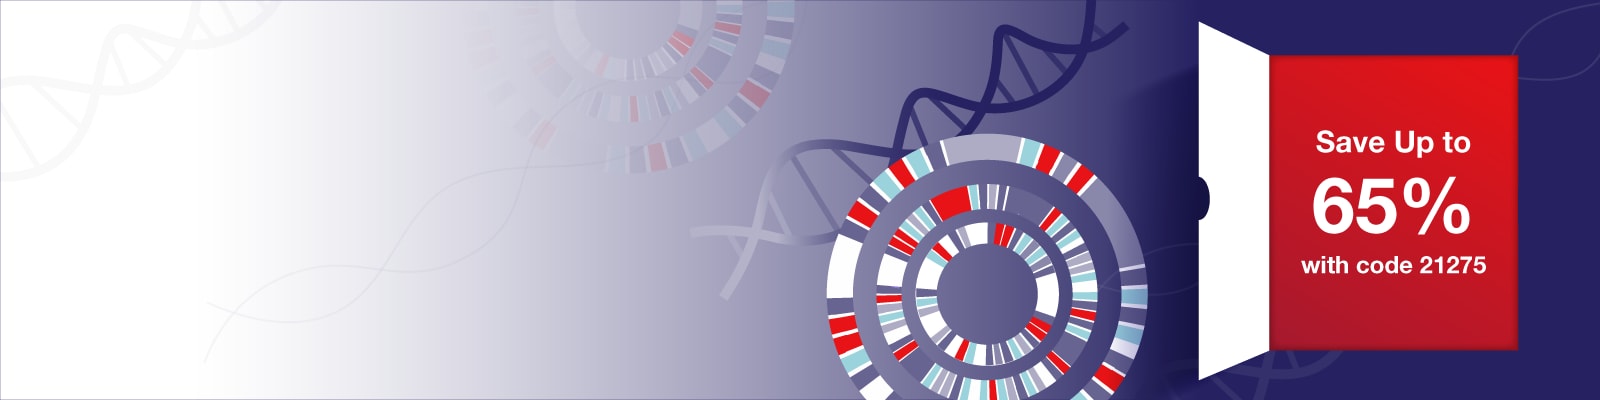 DNA Sequencing banner